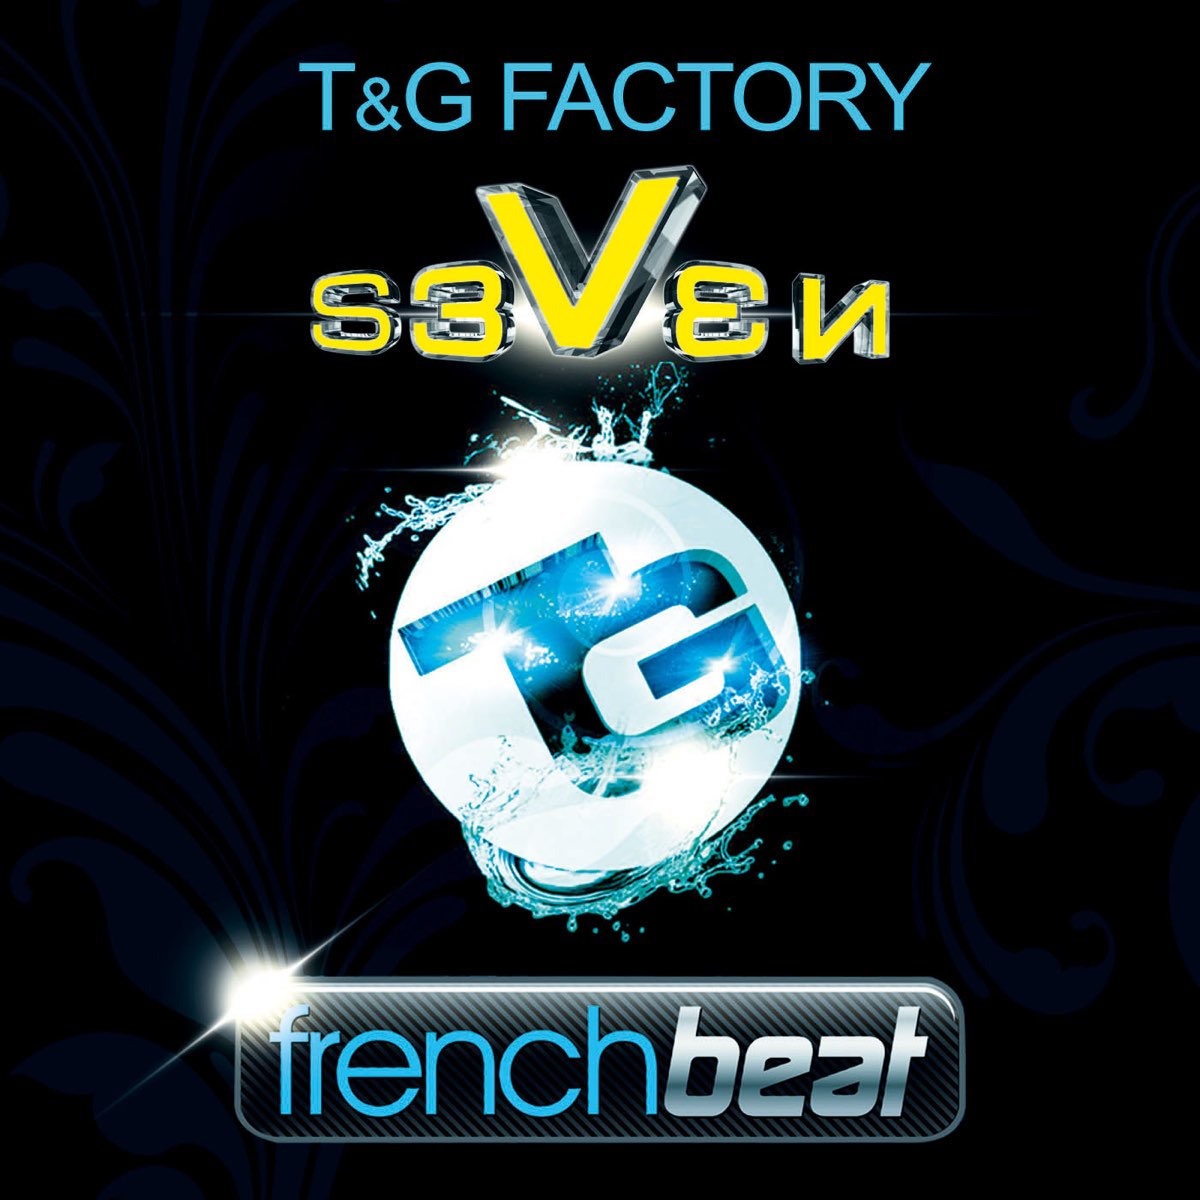 50 mp3 remix. G-Factory. Фабрика je t'aime. G-Factory музыка.